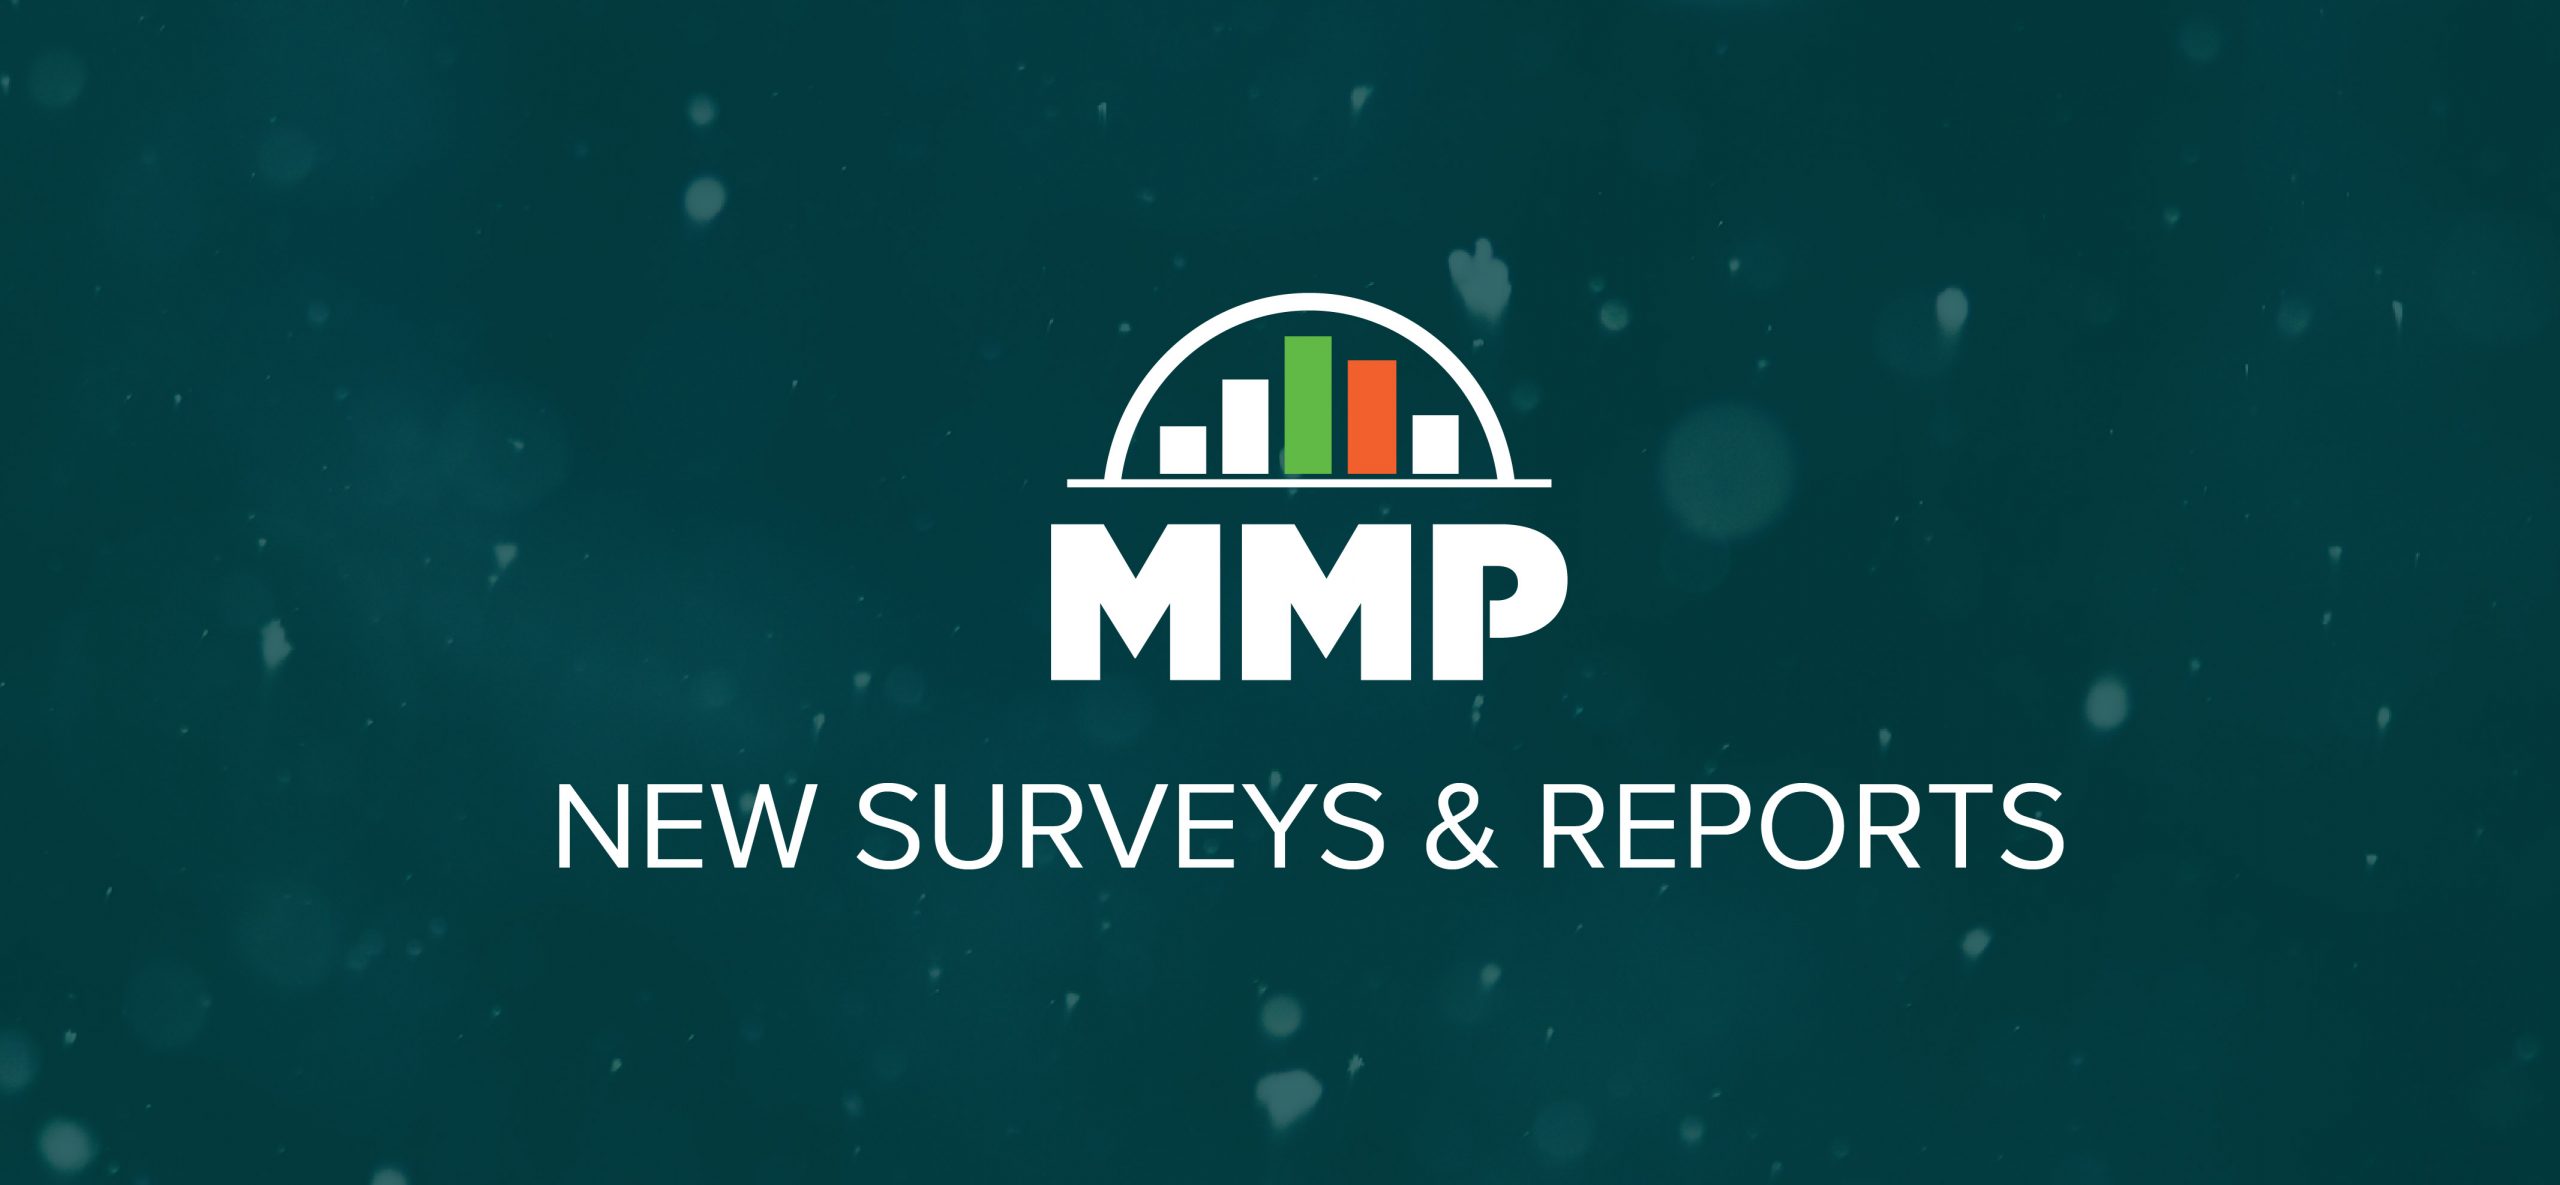 MMP New Surveys and Reports Header